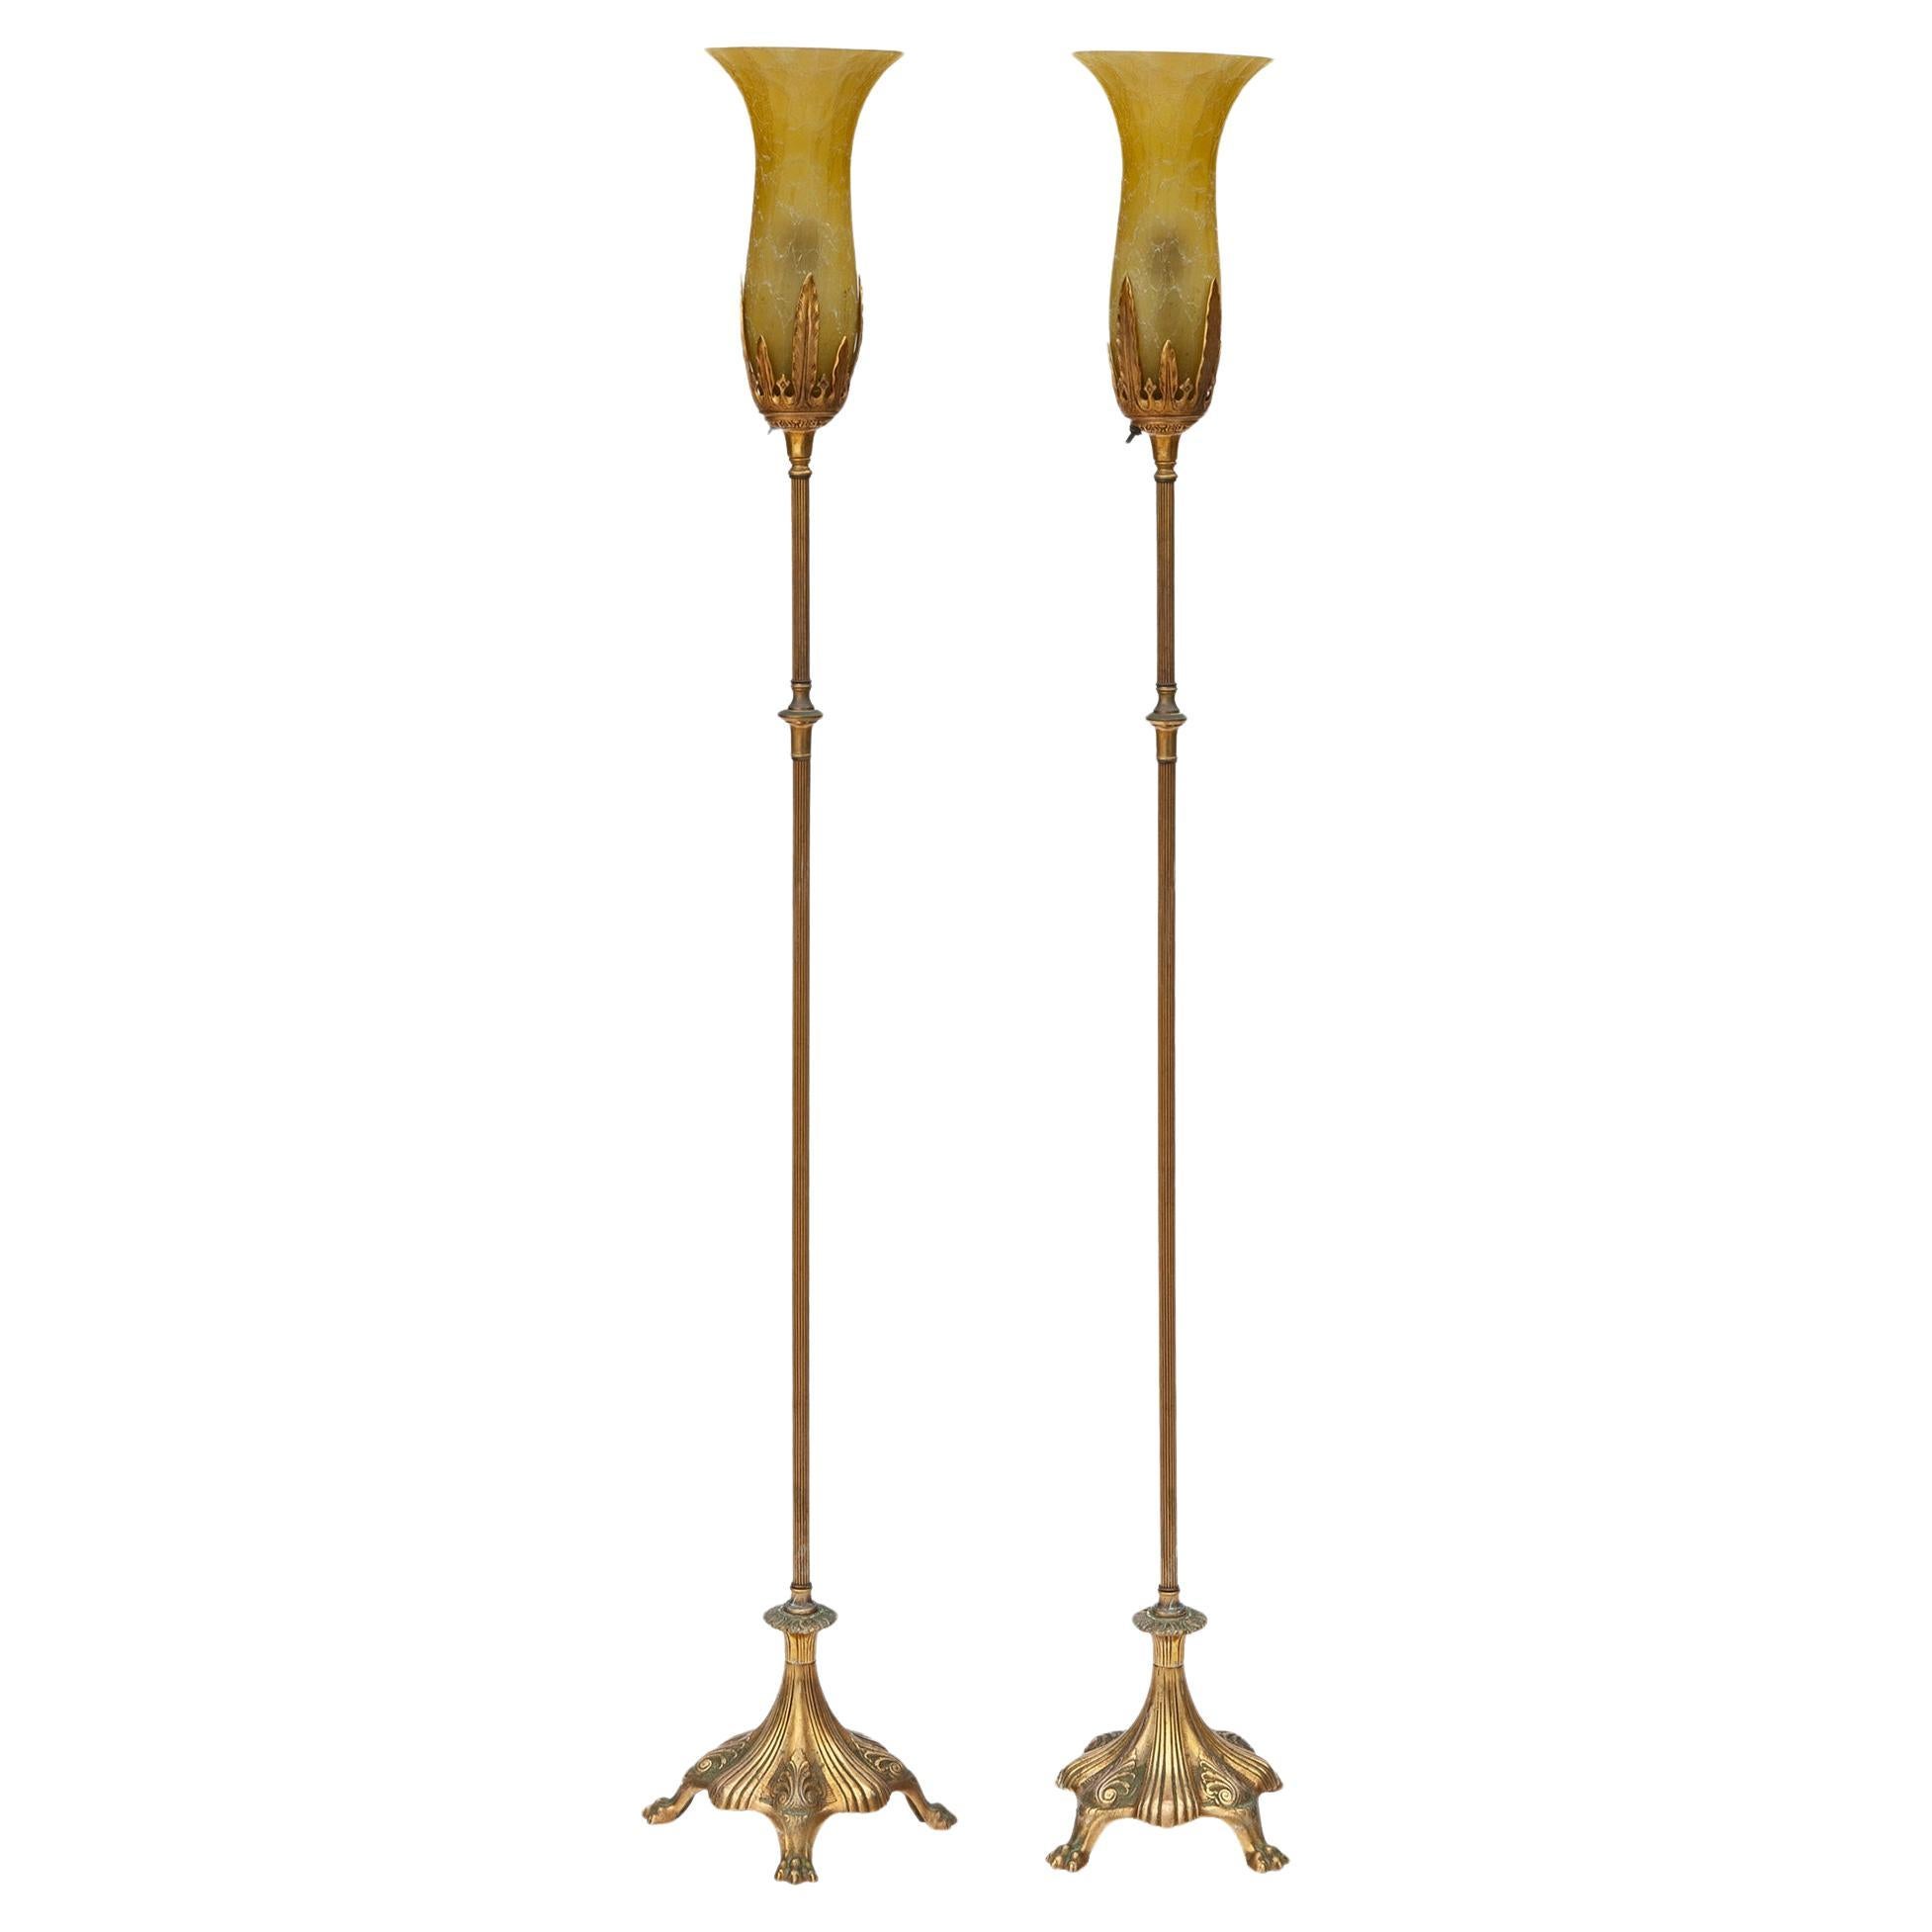 Gilt Brass Floor Lamps Git Bronze with Amber Crackled Glass Shades, a pair For Sale